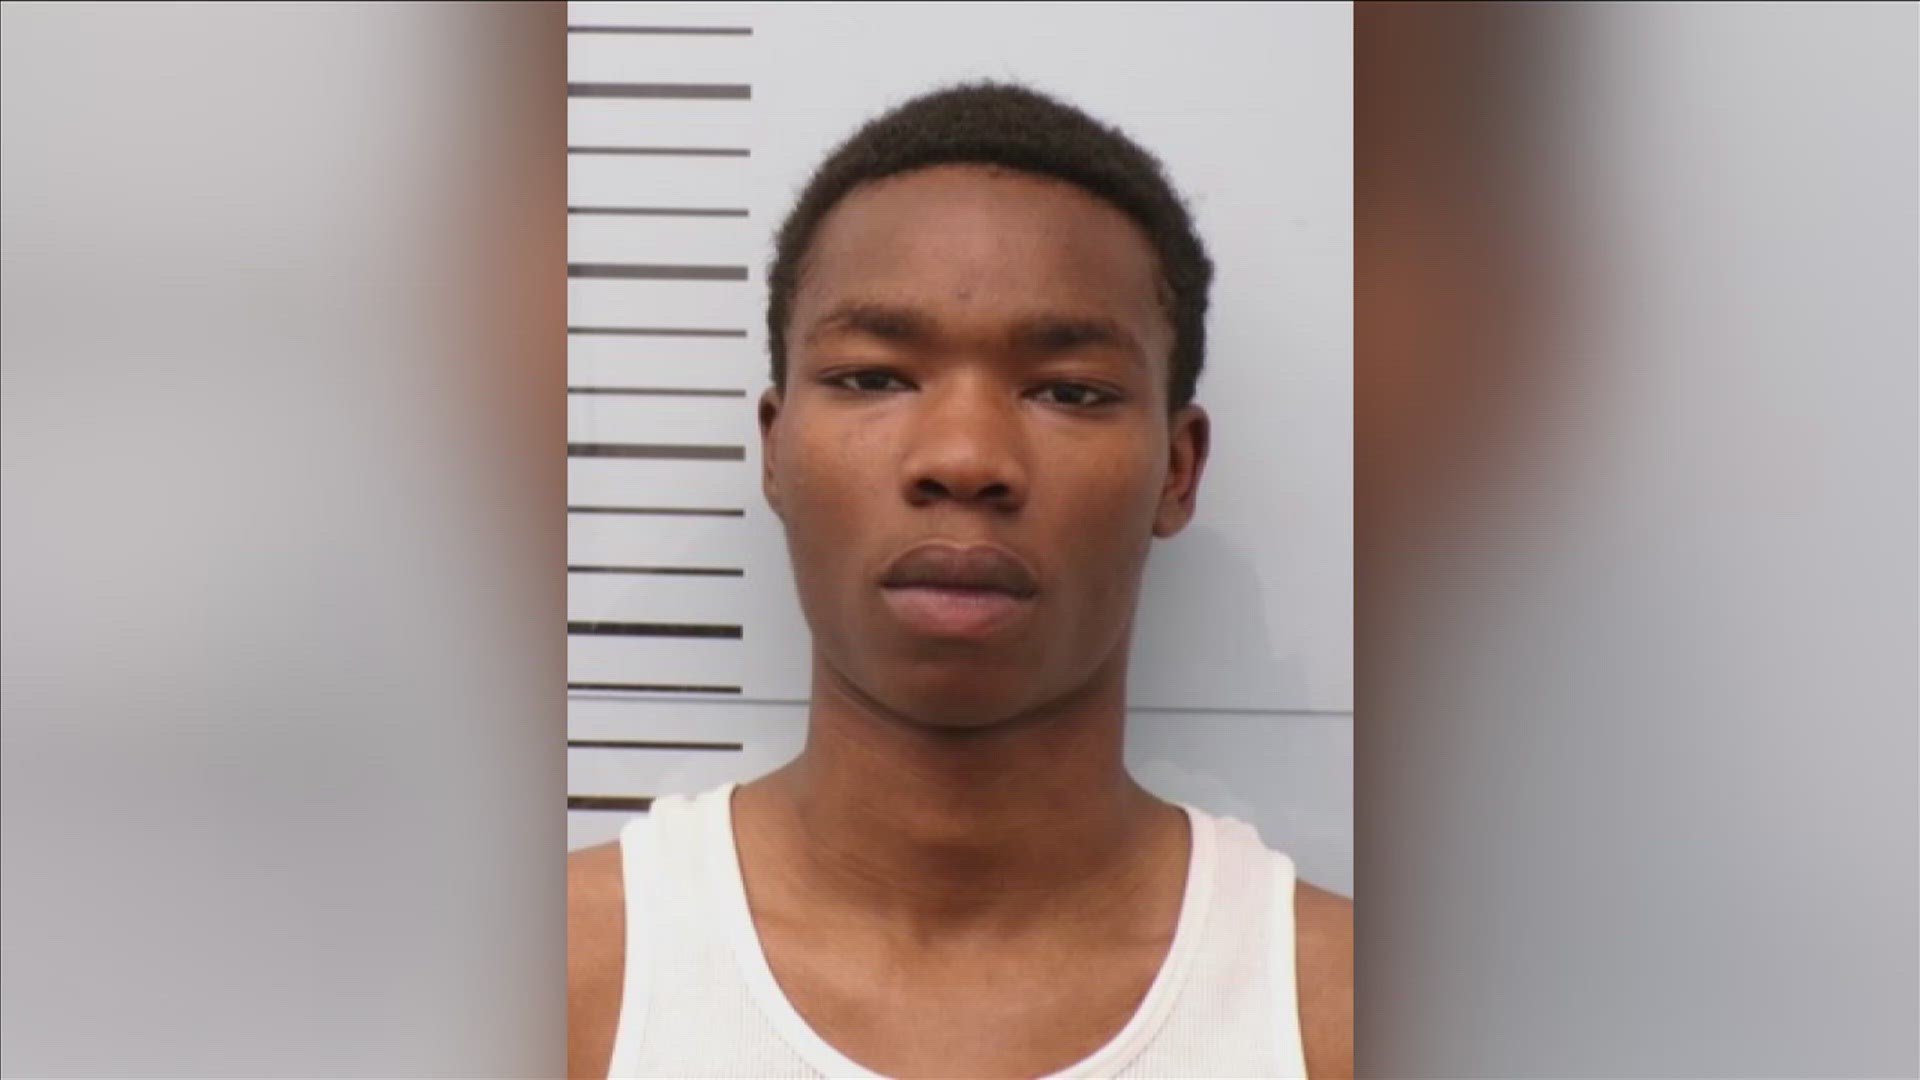 Oxford Police said 19-year-old Dewayne Pegues broke into 32 cars across three different areas in Oxford last Monday.